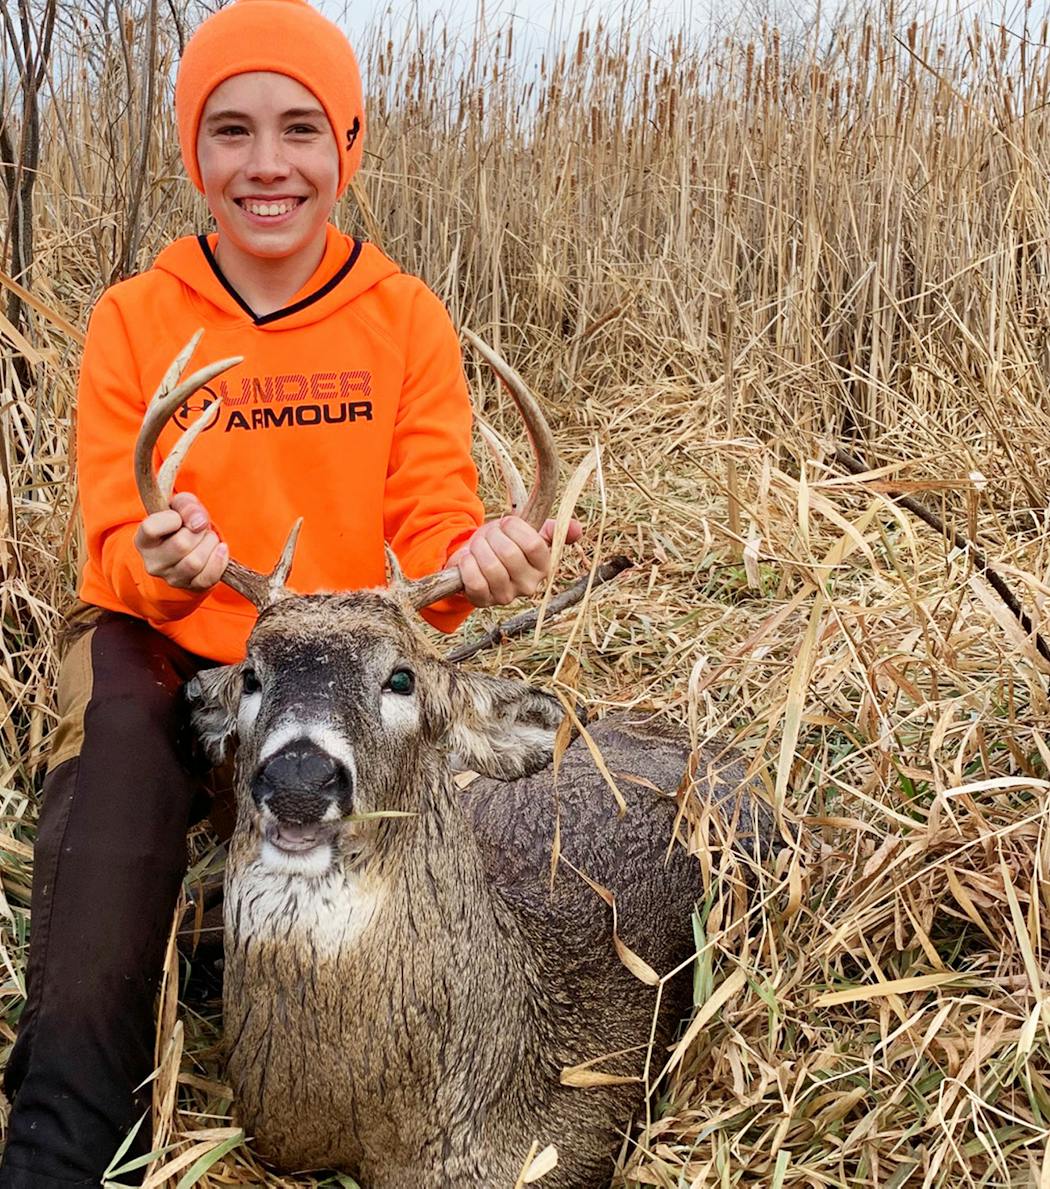 Jack Adams, 13, of Plymouth bagged this eight-point buck while it was loping across public land in western Minnesota. Jack was hunting beside his grandfather, John Adams of Monticello, when he made the shot. It was a memorable opening day of the firearms season.